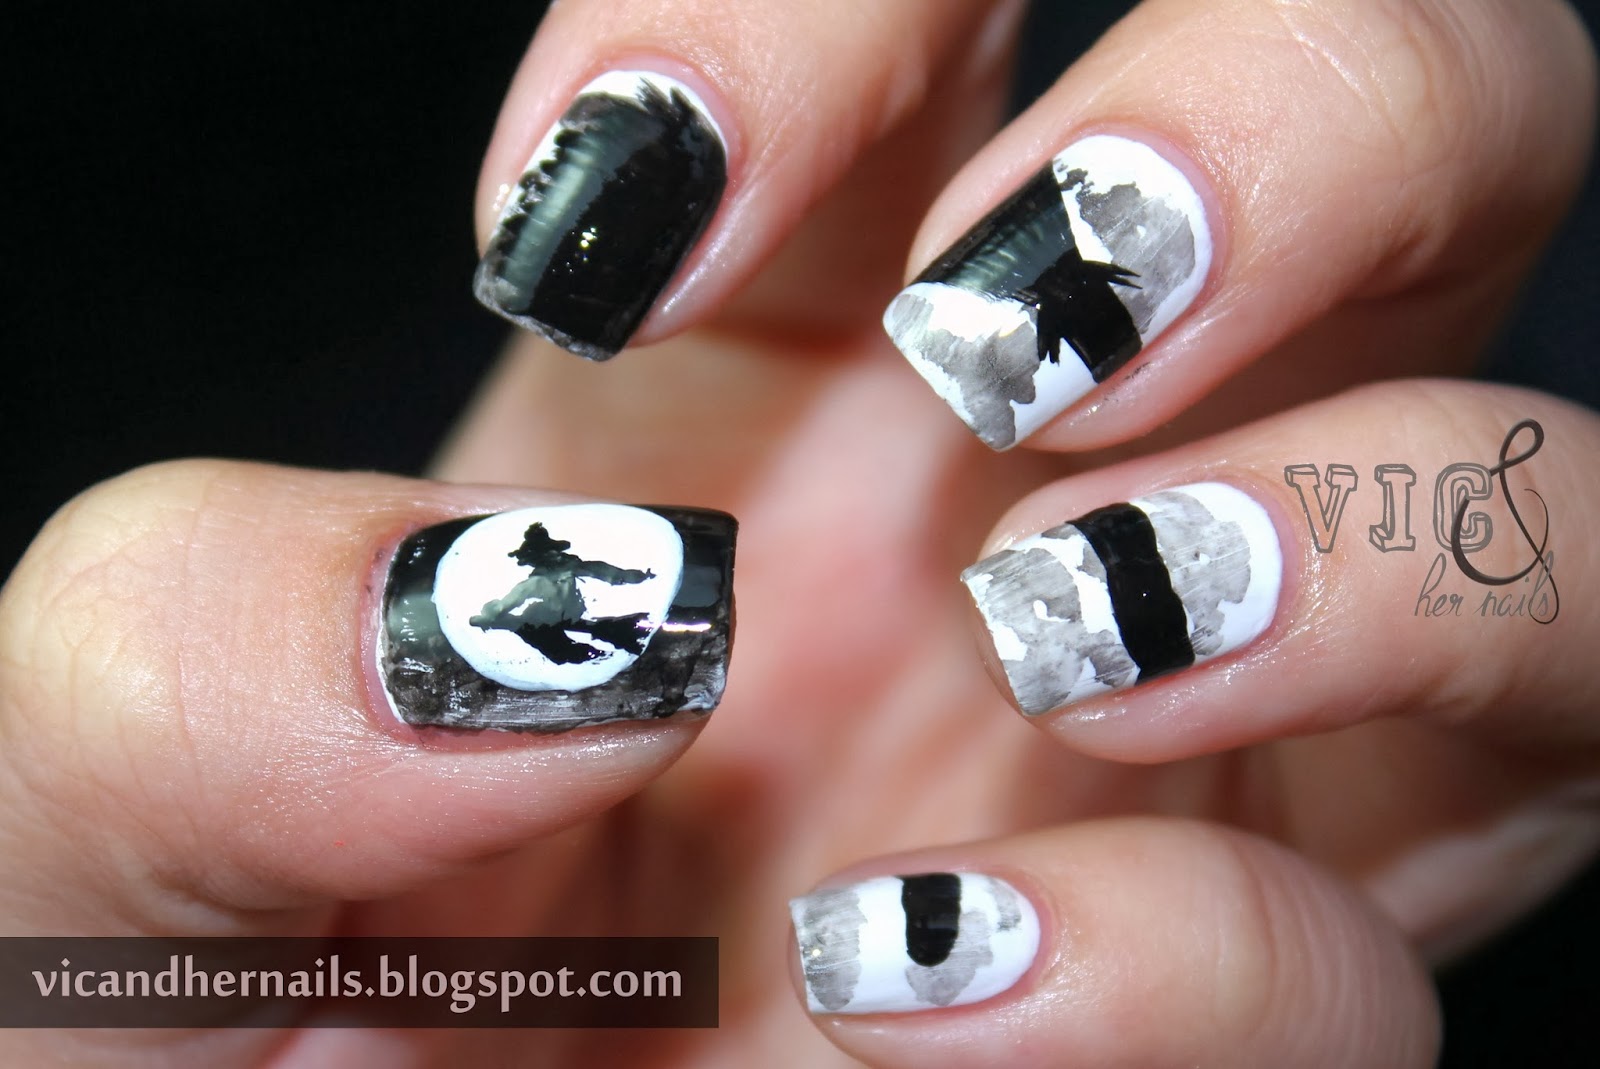 3. 25 Halloween Nail Art Ideas That Are Anything But Basic - wide 5